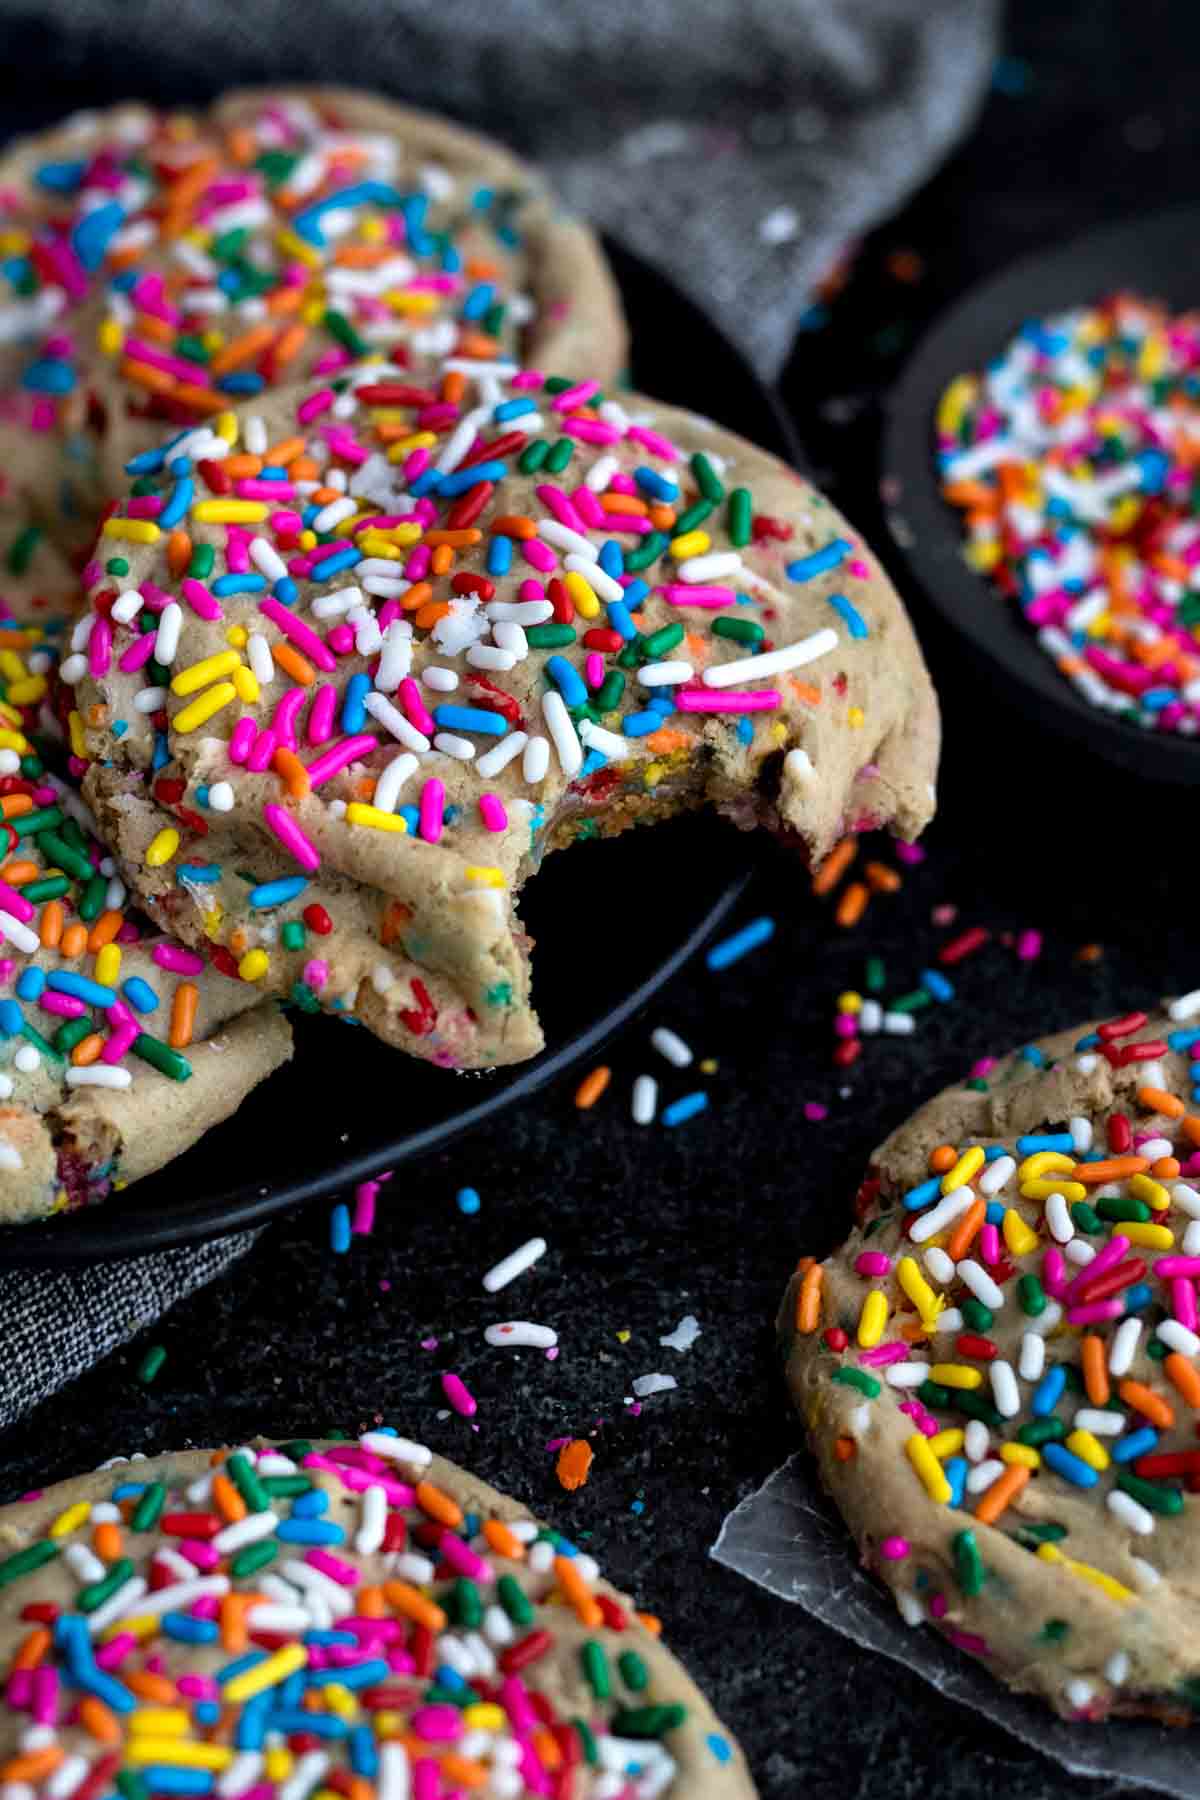 An overflowing plate of bright rainbow sprinkled Funfetti Cookies ready to be enjoyed.